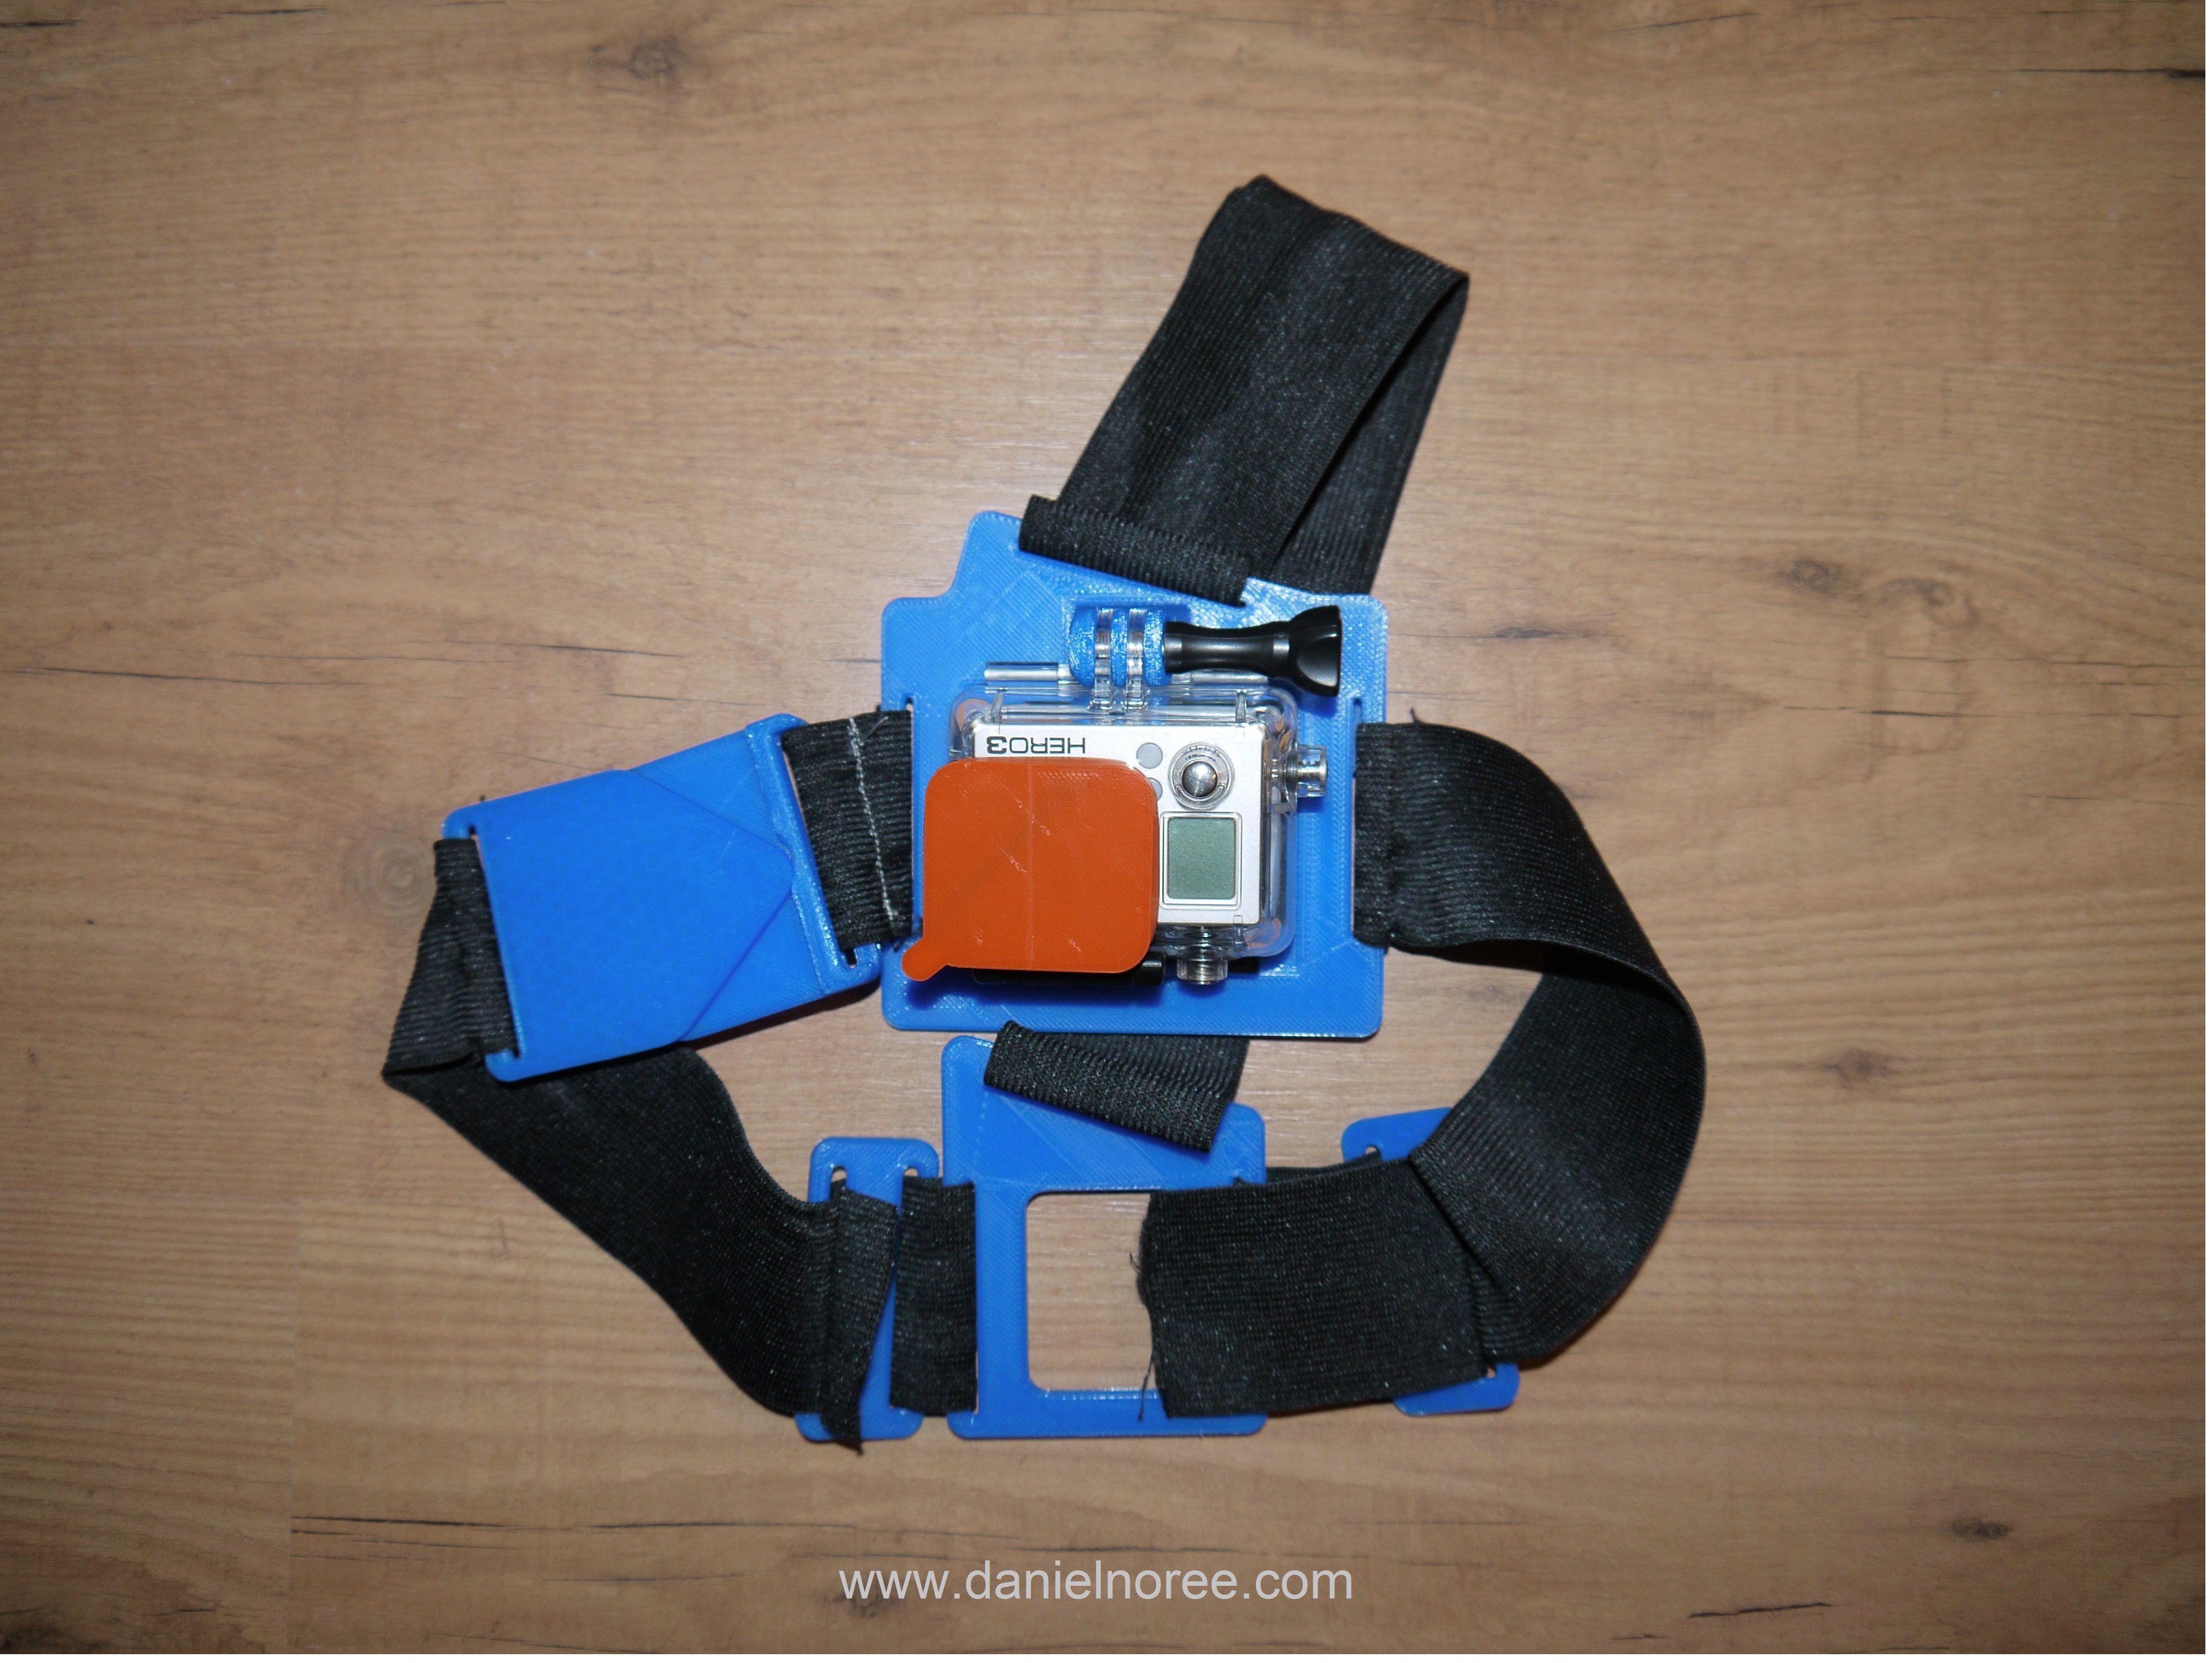 3d Printed Chest Mount Harness For Gopro Cameras By Danielnoree Pinshape